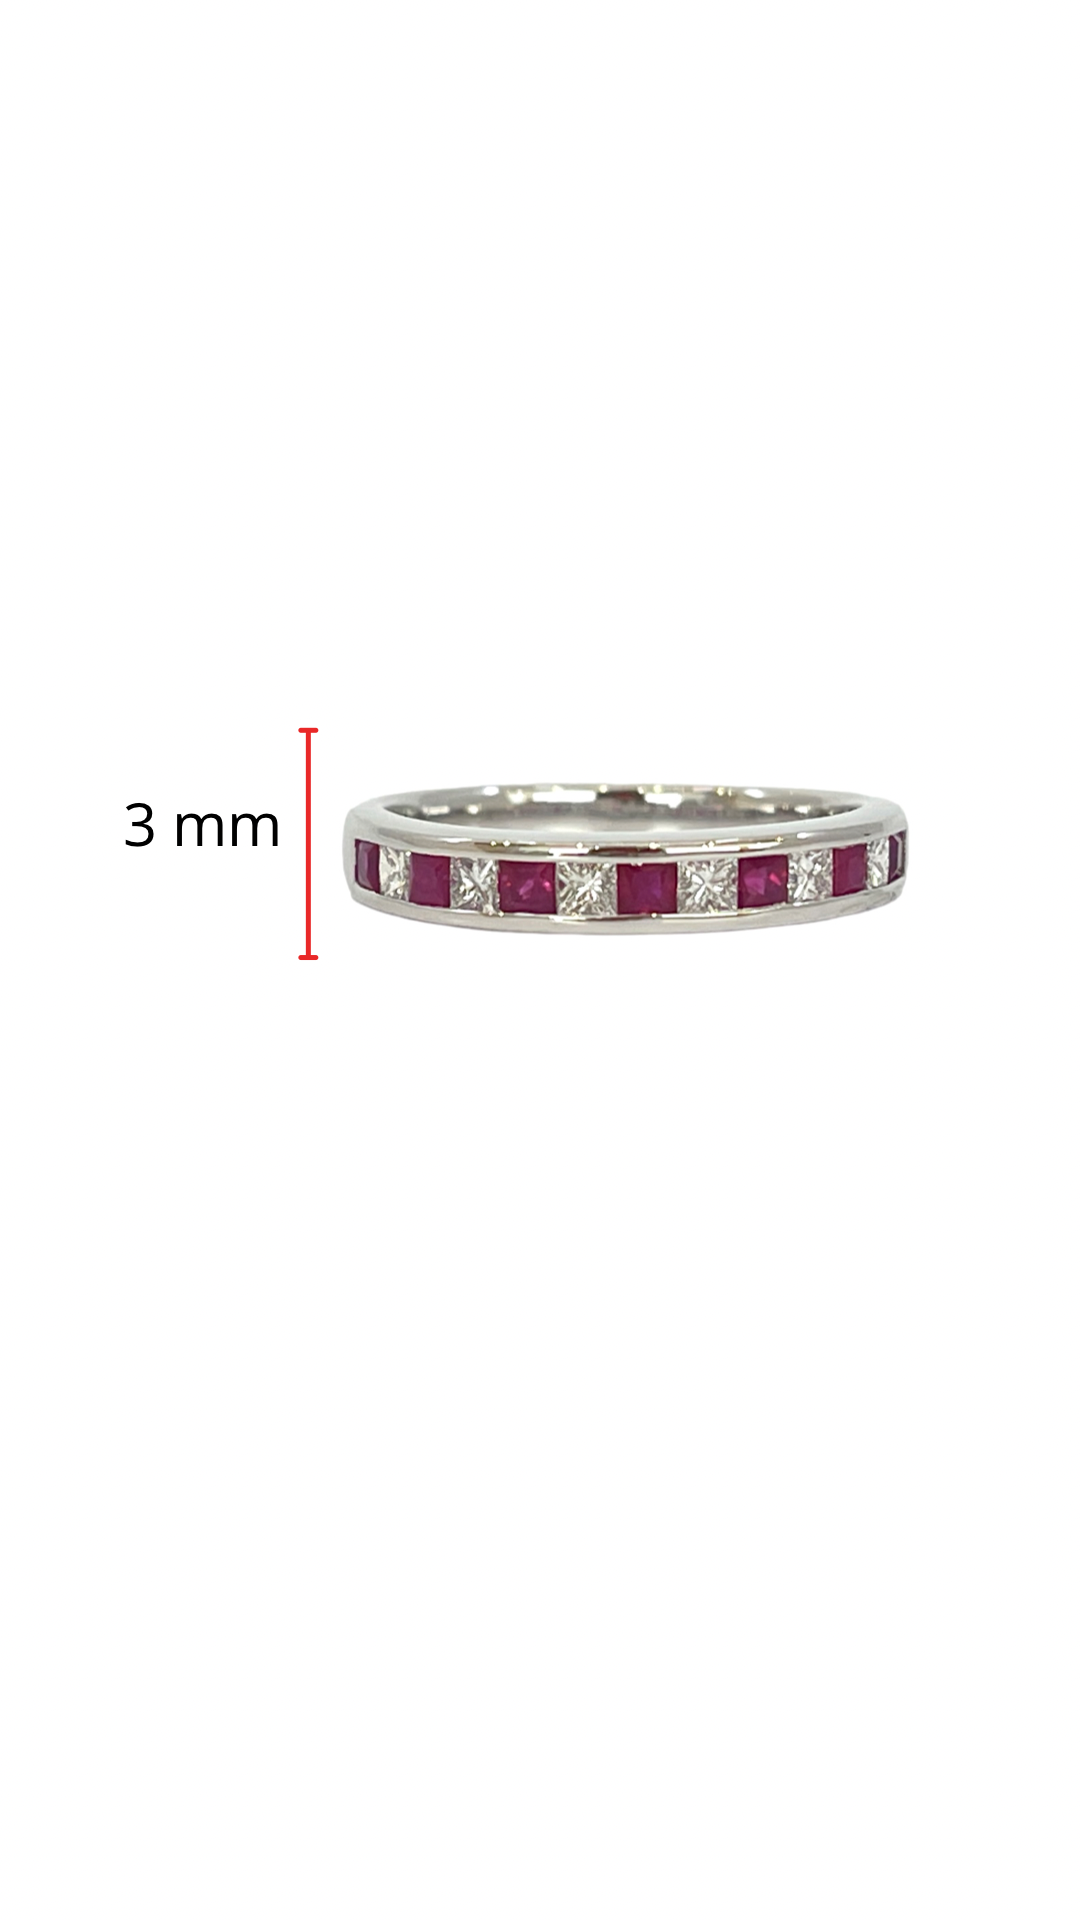 10K White Gold 0.40cttw Princess Cut Ruby and 0.28cttw Diamond Channel Set Ring - Size 7